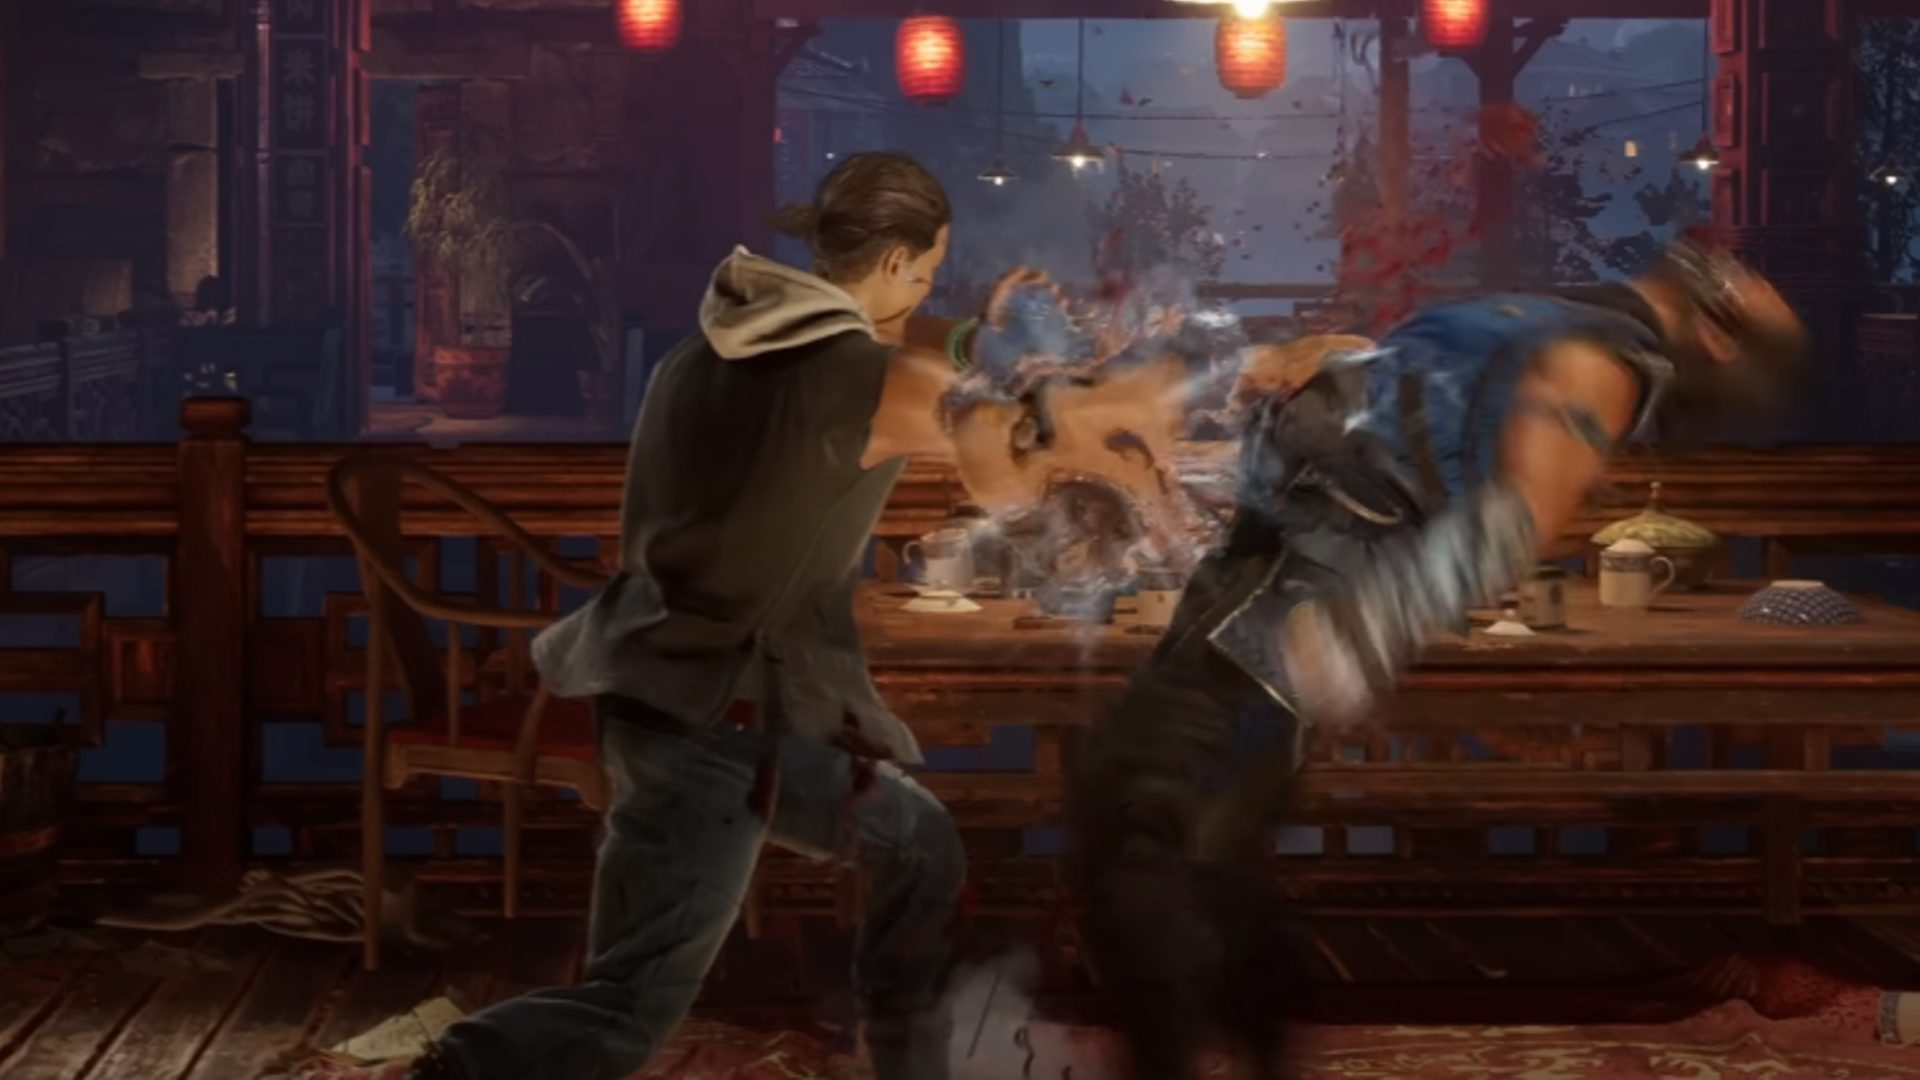 Mortal Kombat 1 Characters: Kung Lao can be seen fighitng sub zero